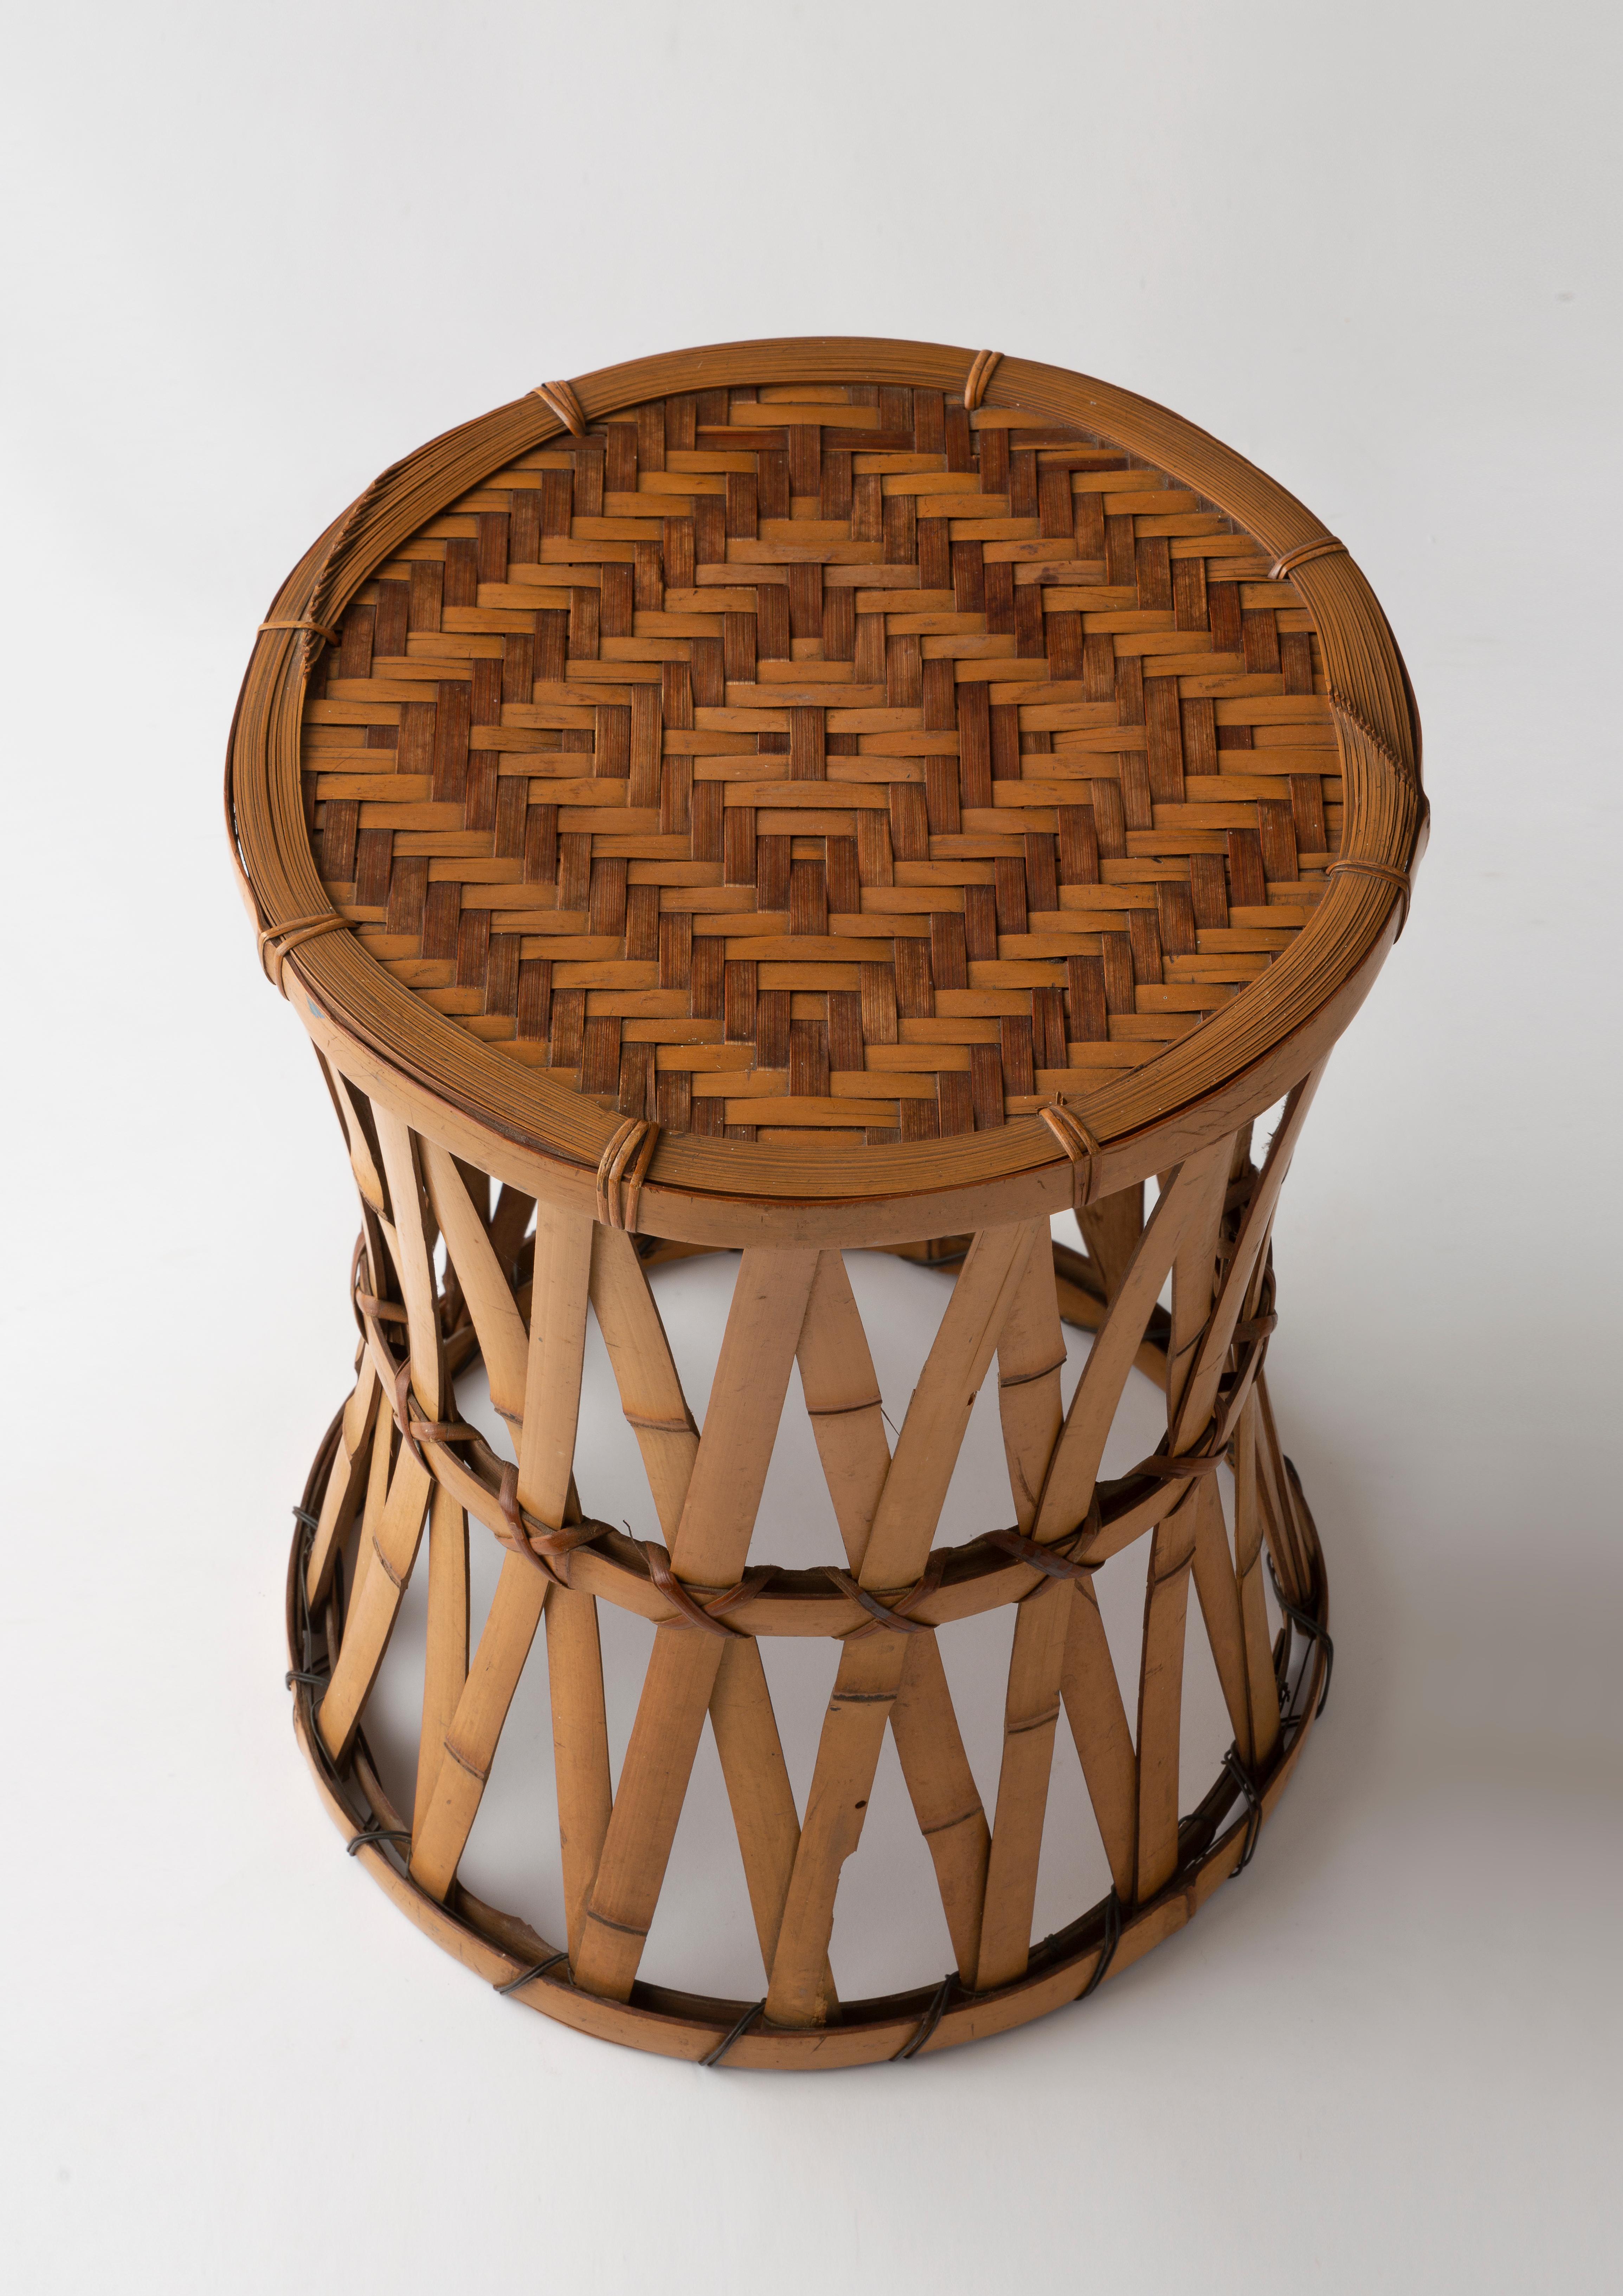 A stool attributed to Hosai Yokota, in bamboo, realized by Takashimaya department stores, Japan
The same model exhibited for 